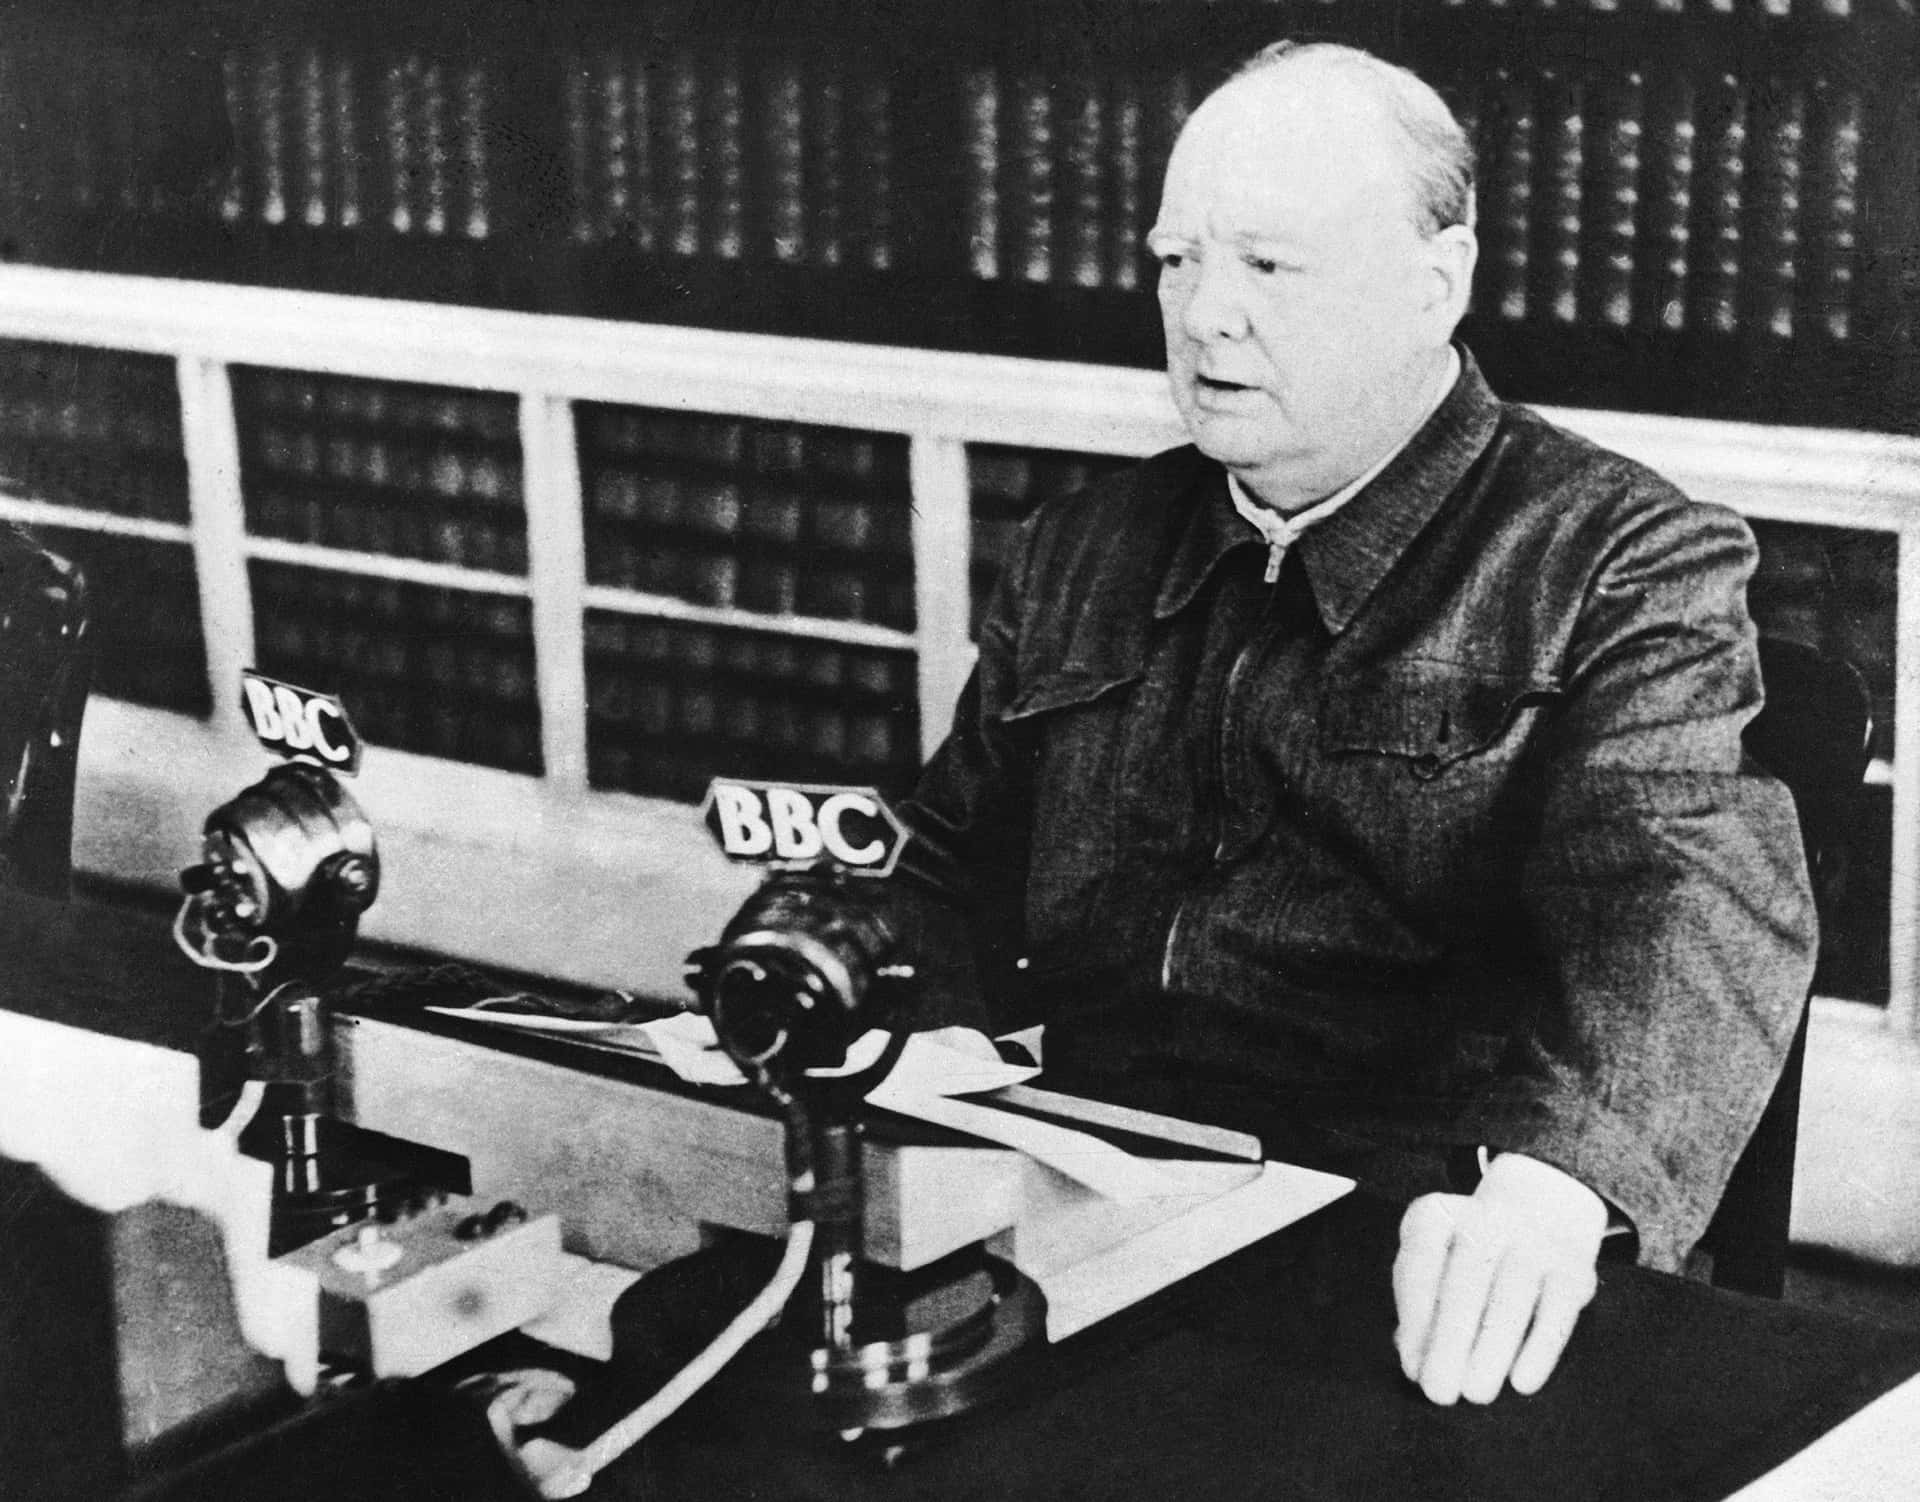 A Man Sitting At A Desk With Microphones